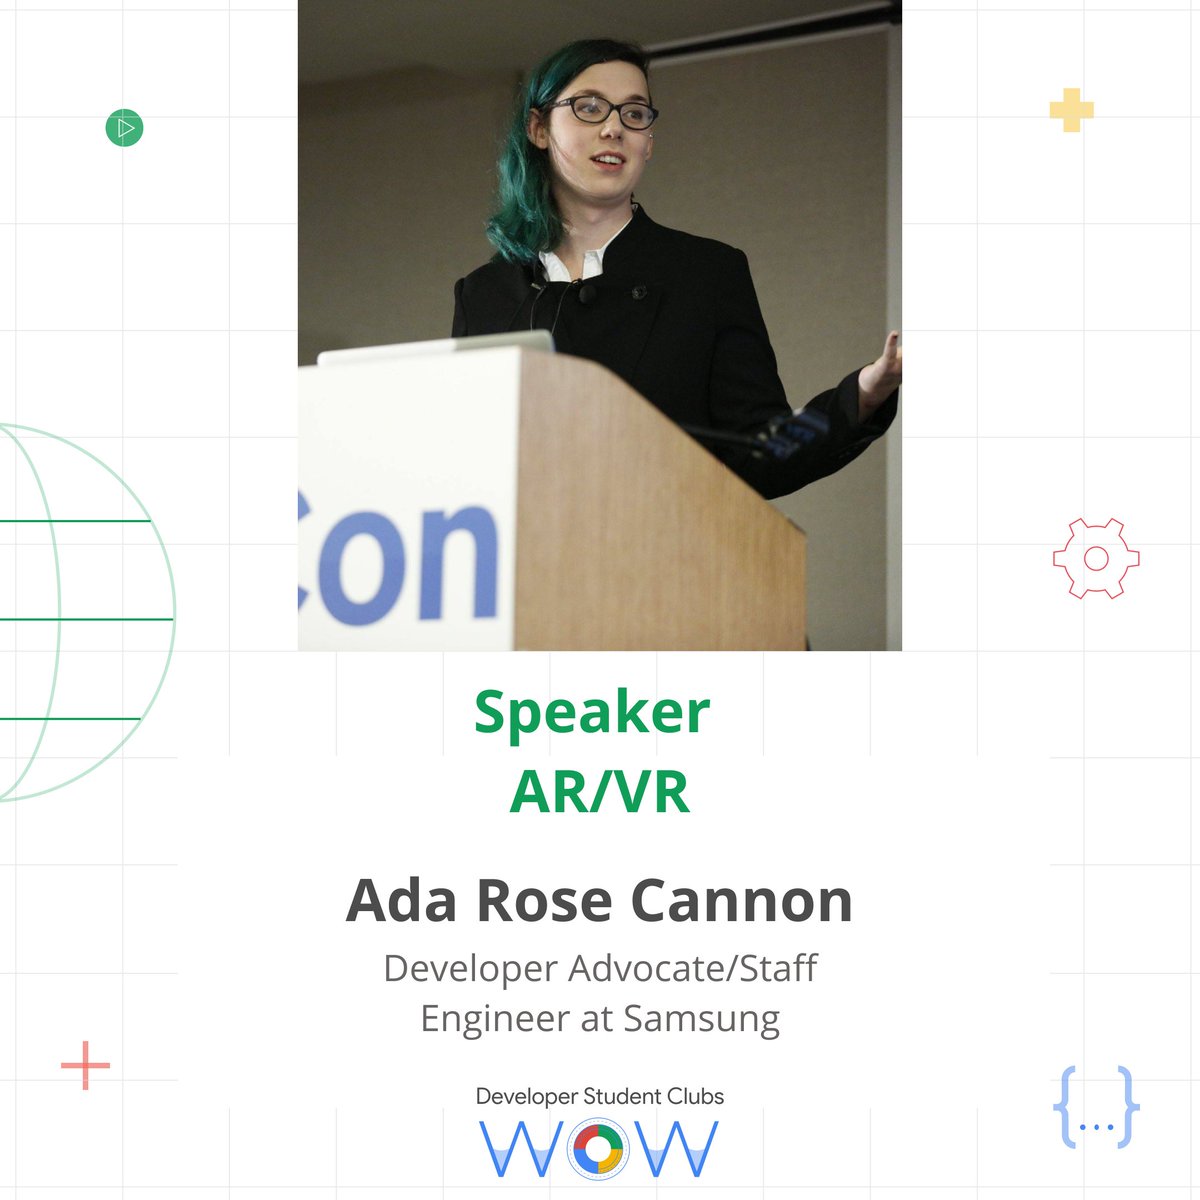 Let us take a moment to introduce @Lady_Ada_King, our speaker for the #ar #vr session 👾 

She is a Developer Advocate for @samsunginternet and co-chair @w3c #WebXR groups 🔥🔥

Looking forward to some super 🆒 stuff 😎😎

#letswow #developerstudentclubs #dsc #googledevelopers